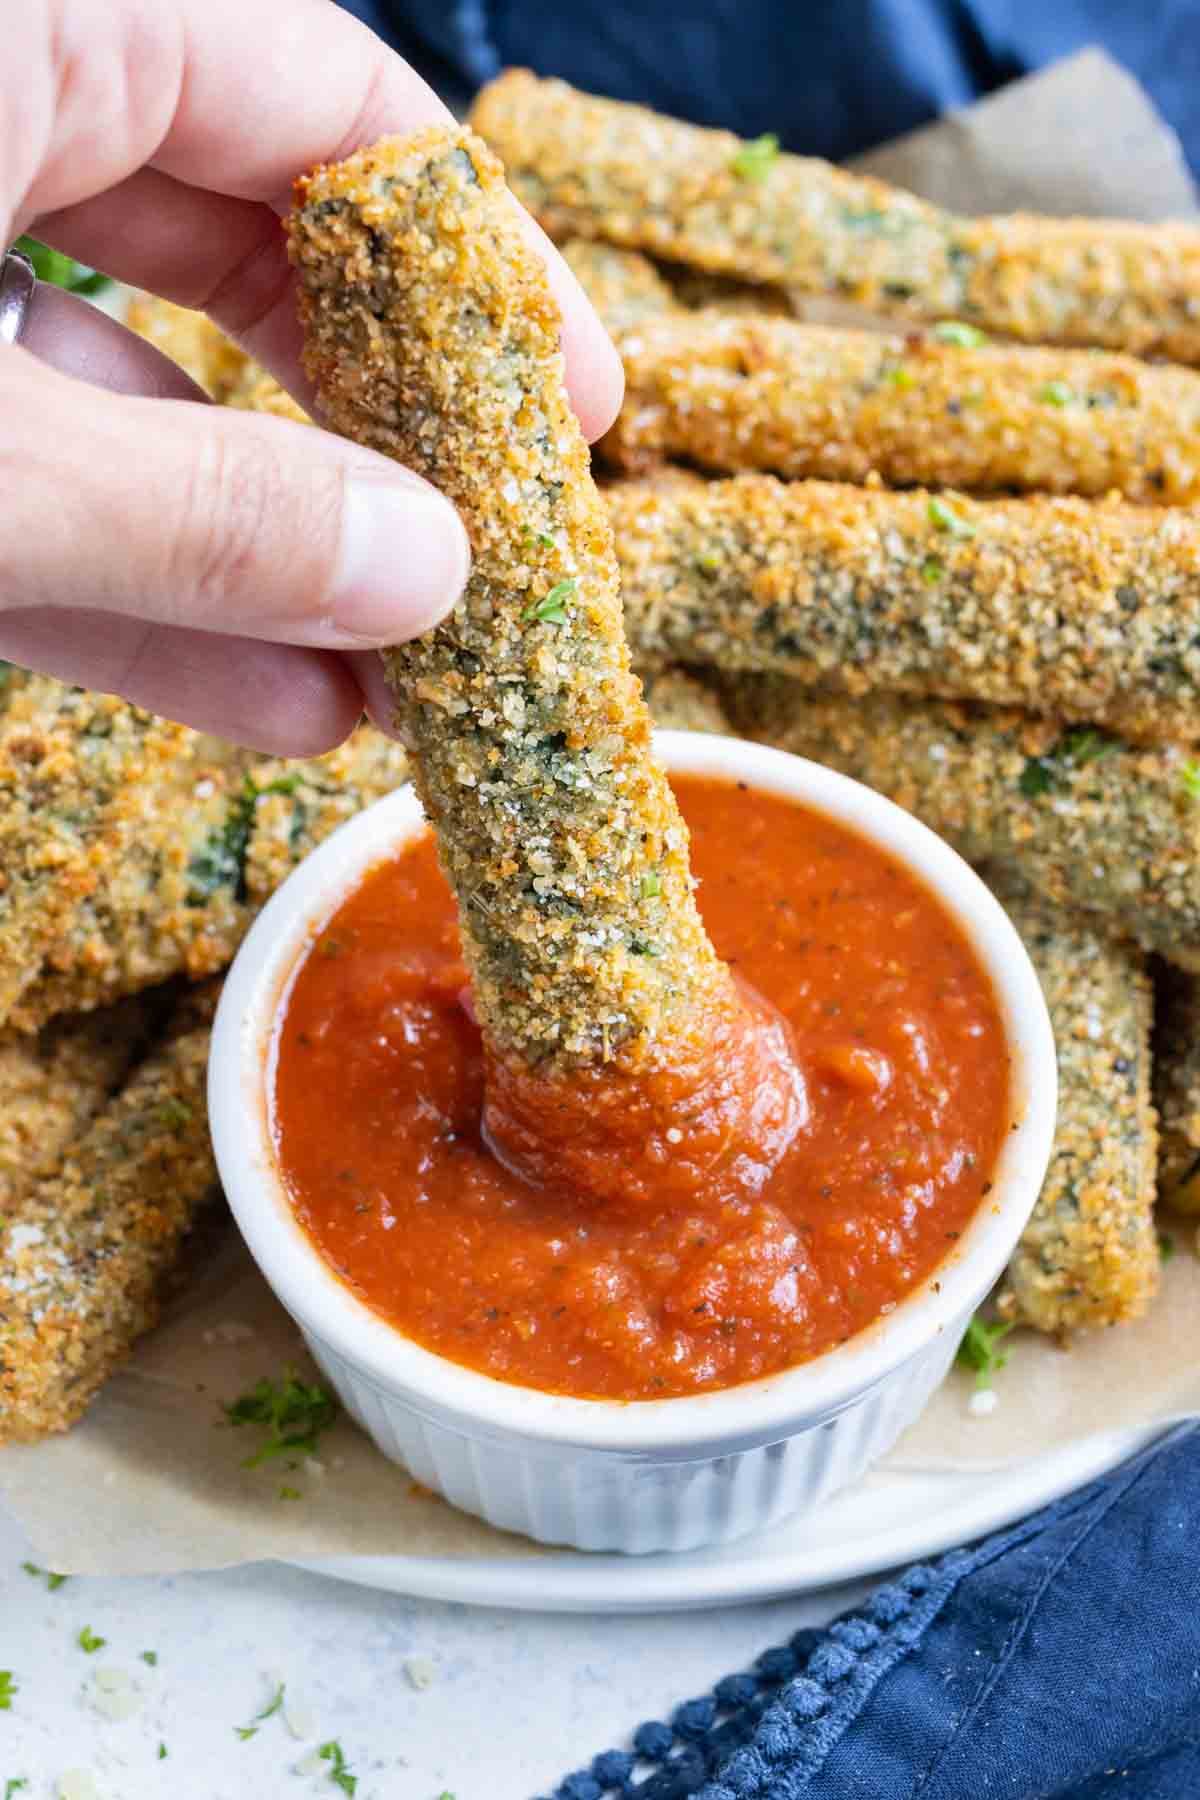 Parmesan zucchini fries dipped in sauce on a white plate.